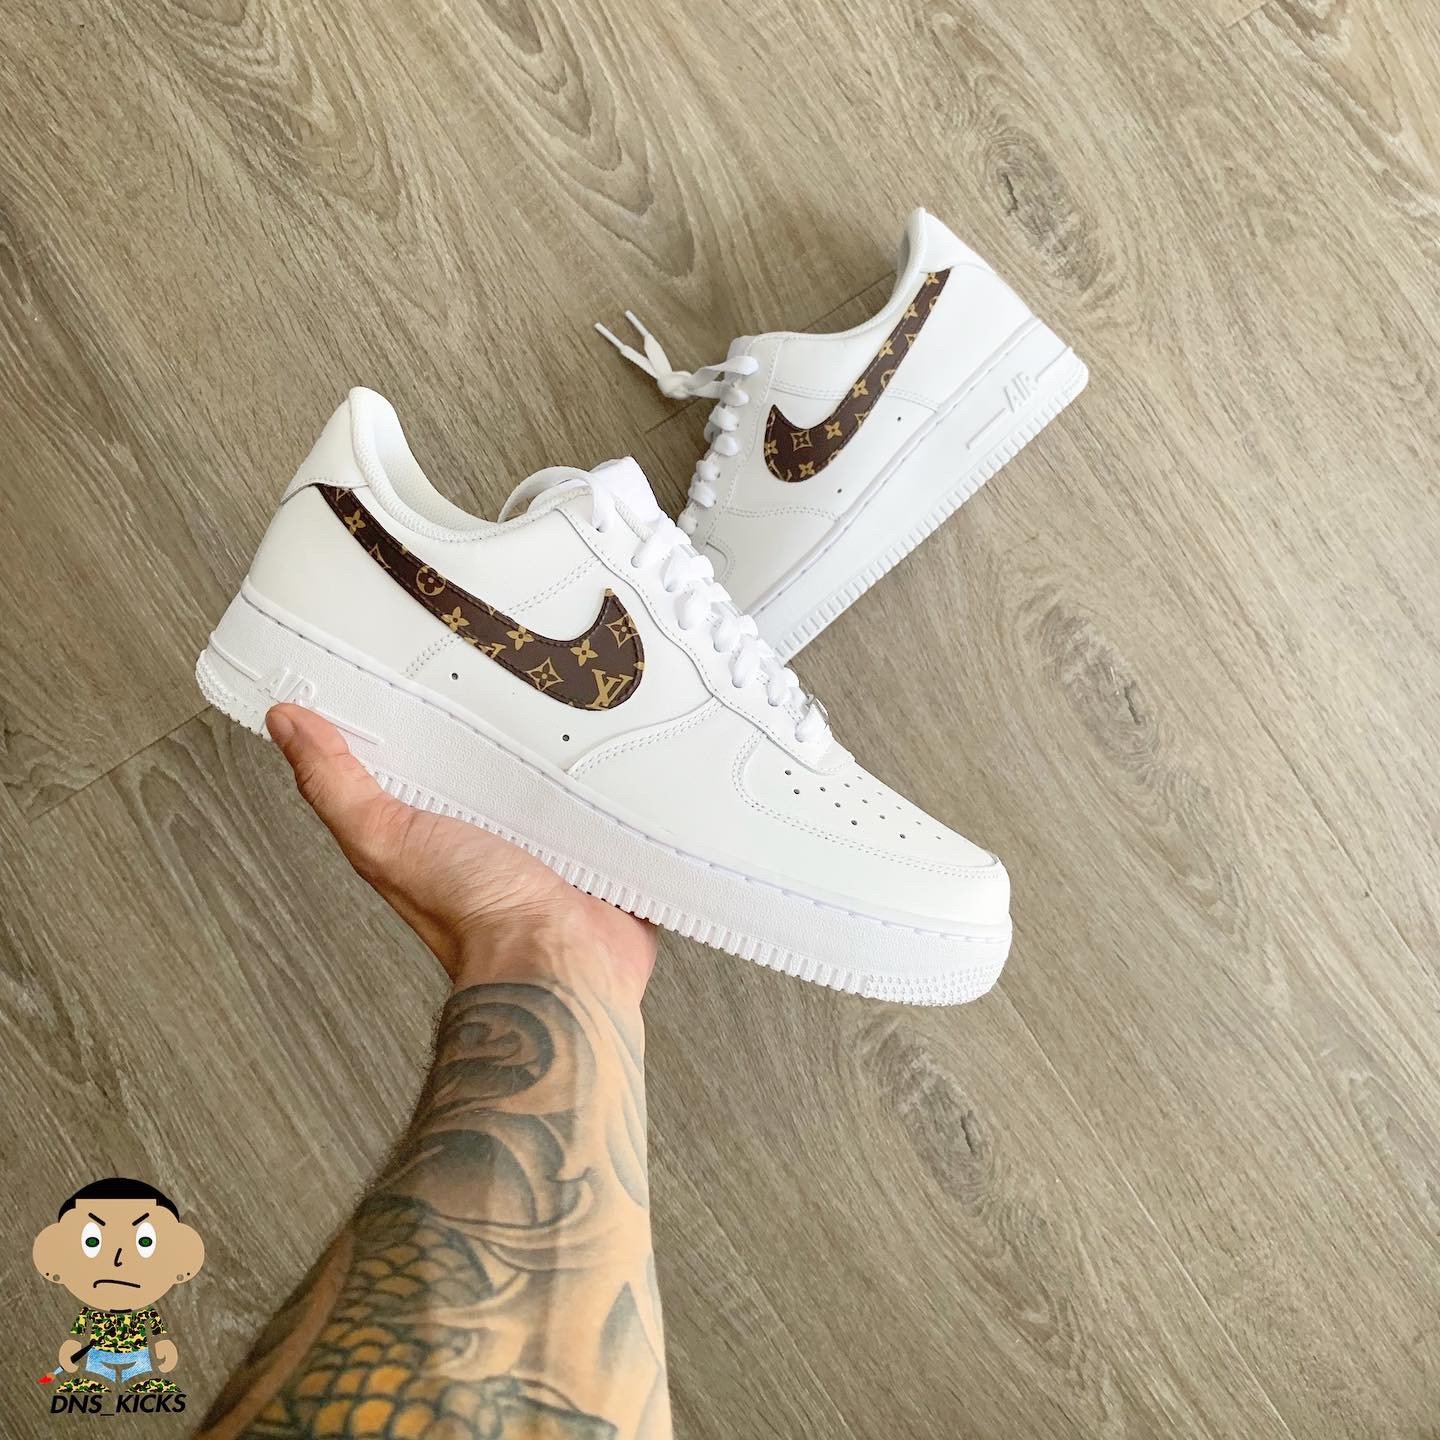 lv air force 1s